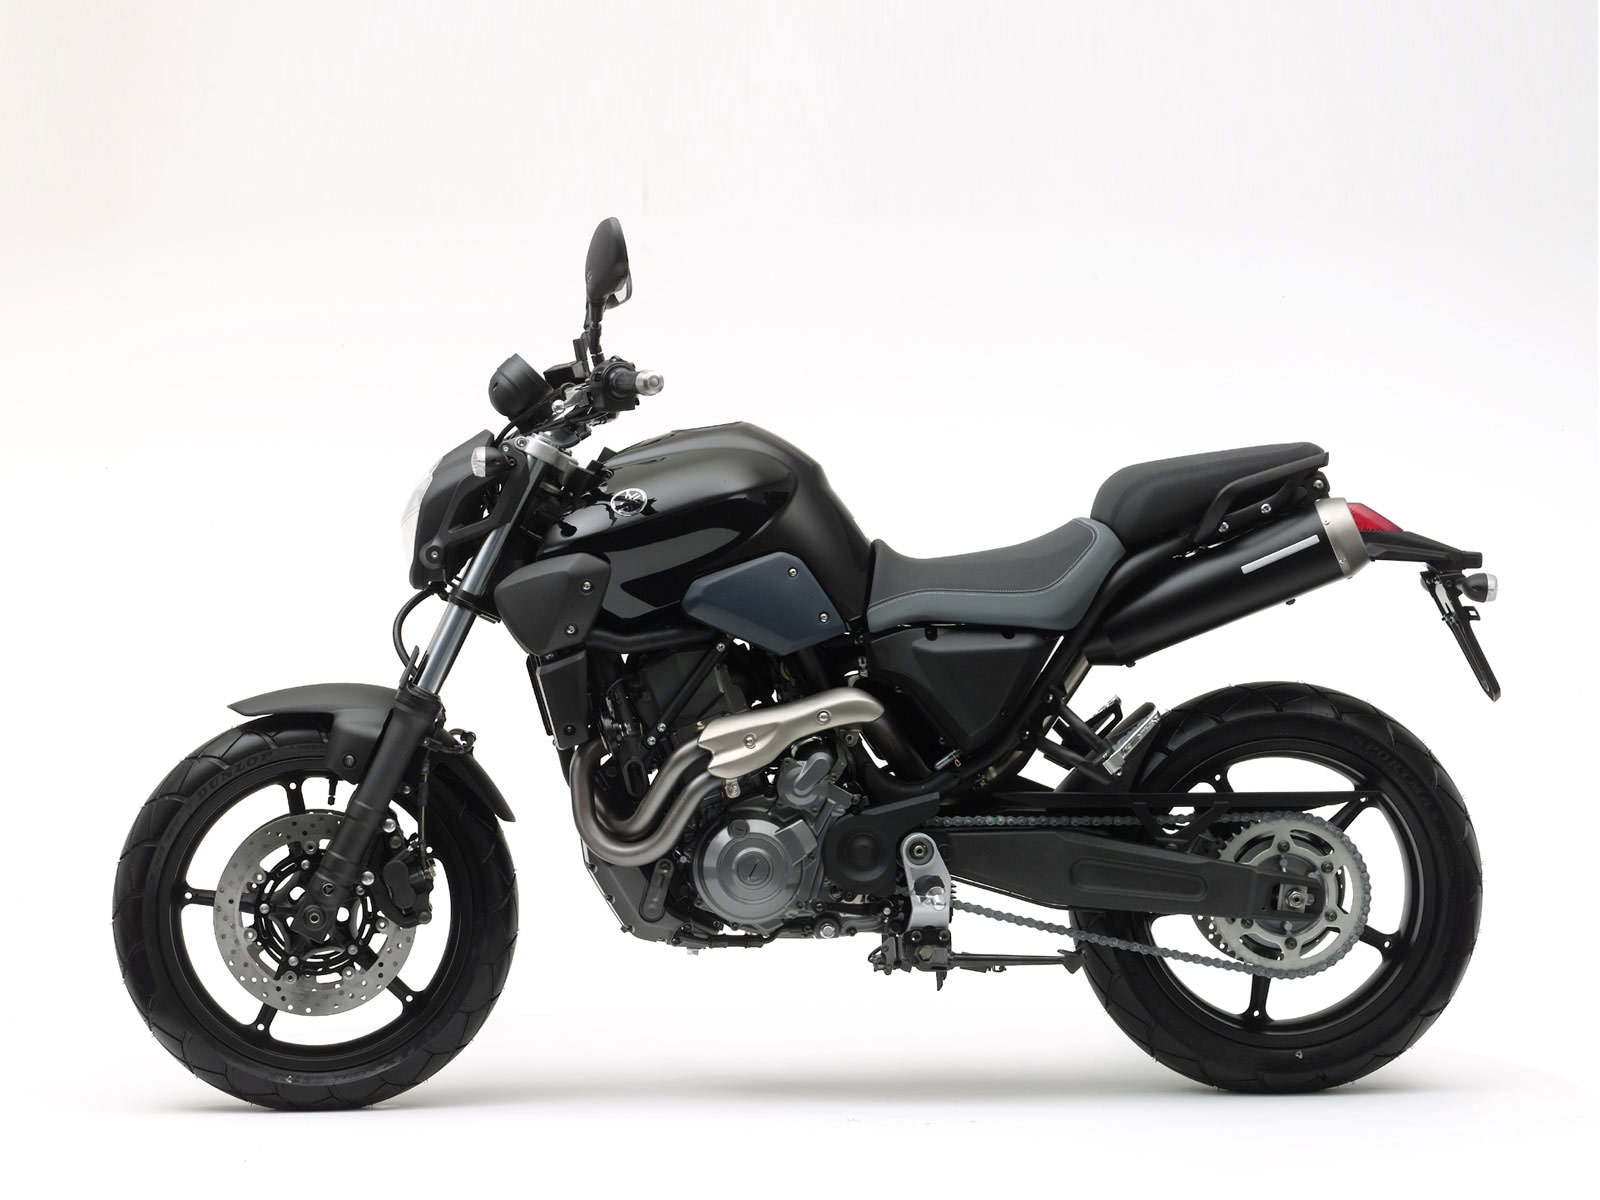 2007 YAMAHA MT03 Motorcycle pictures, specifications